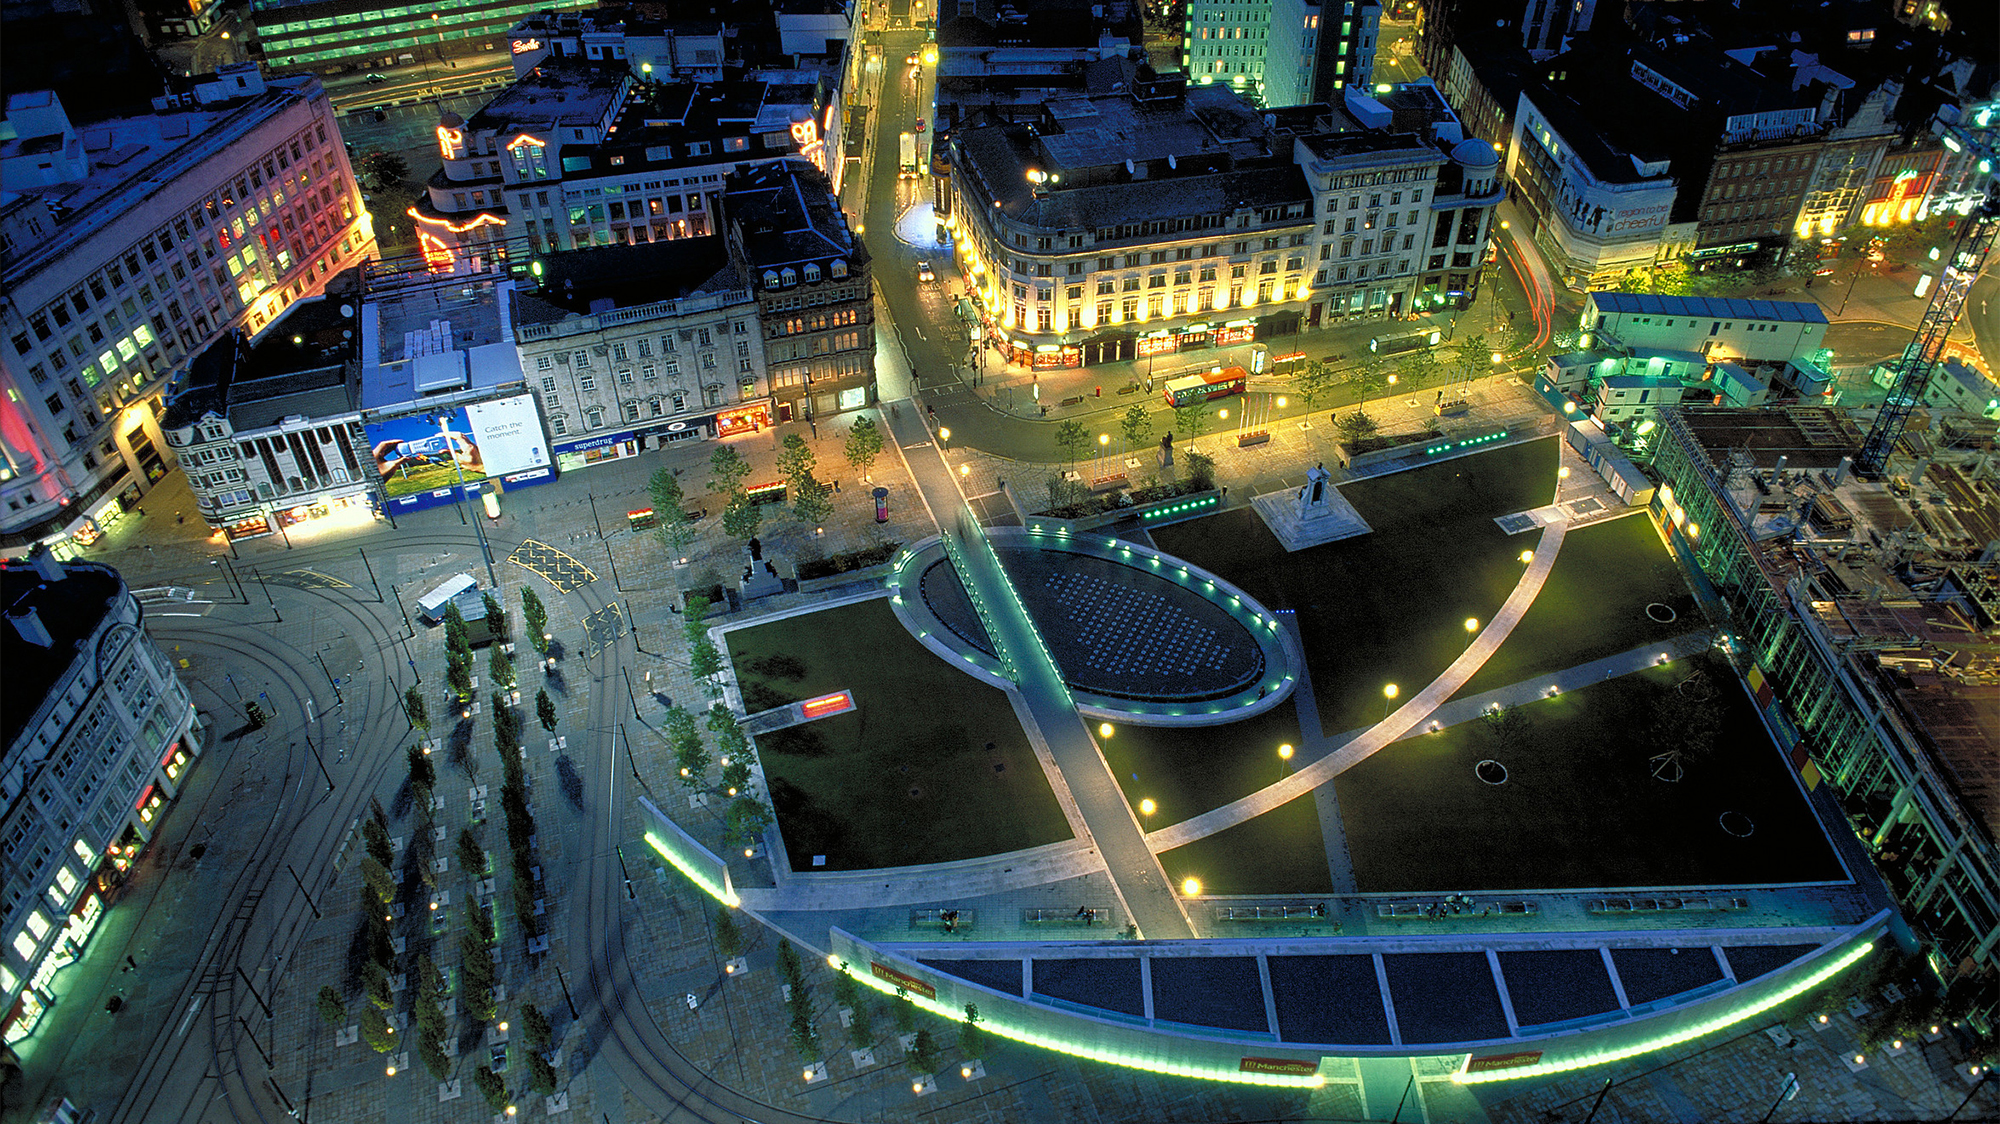 Piccadilly Gardens - Arup2000 x 1124